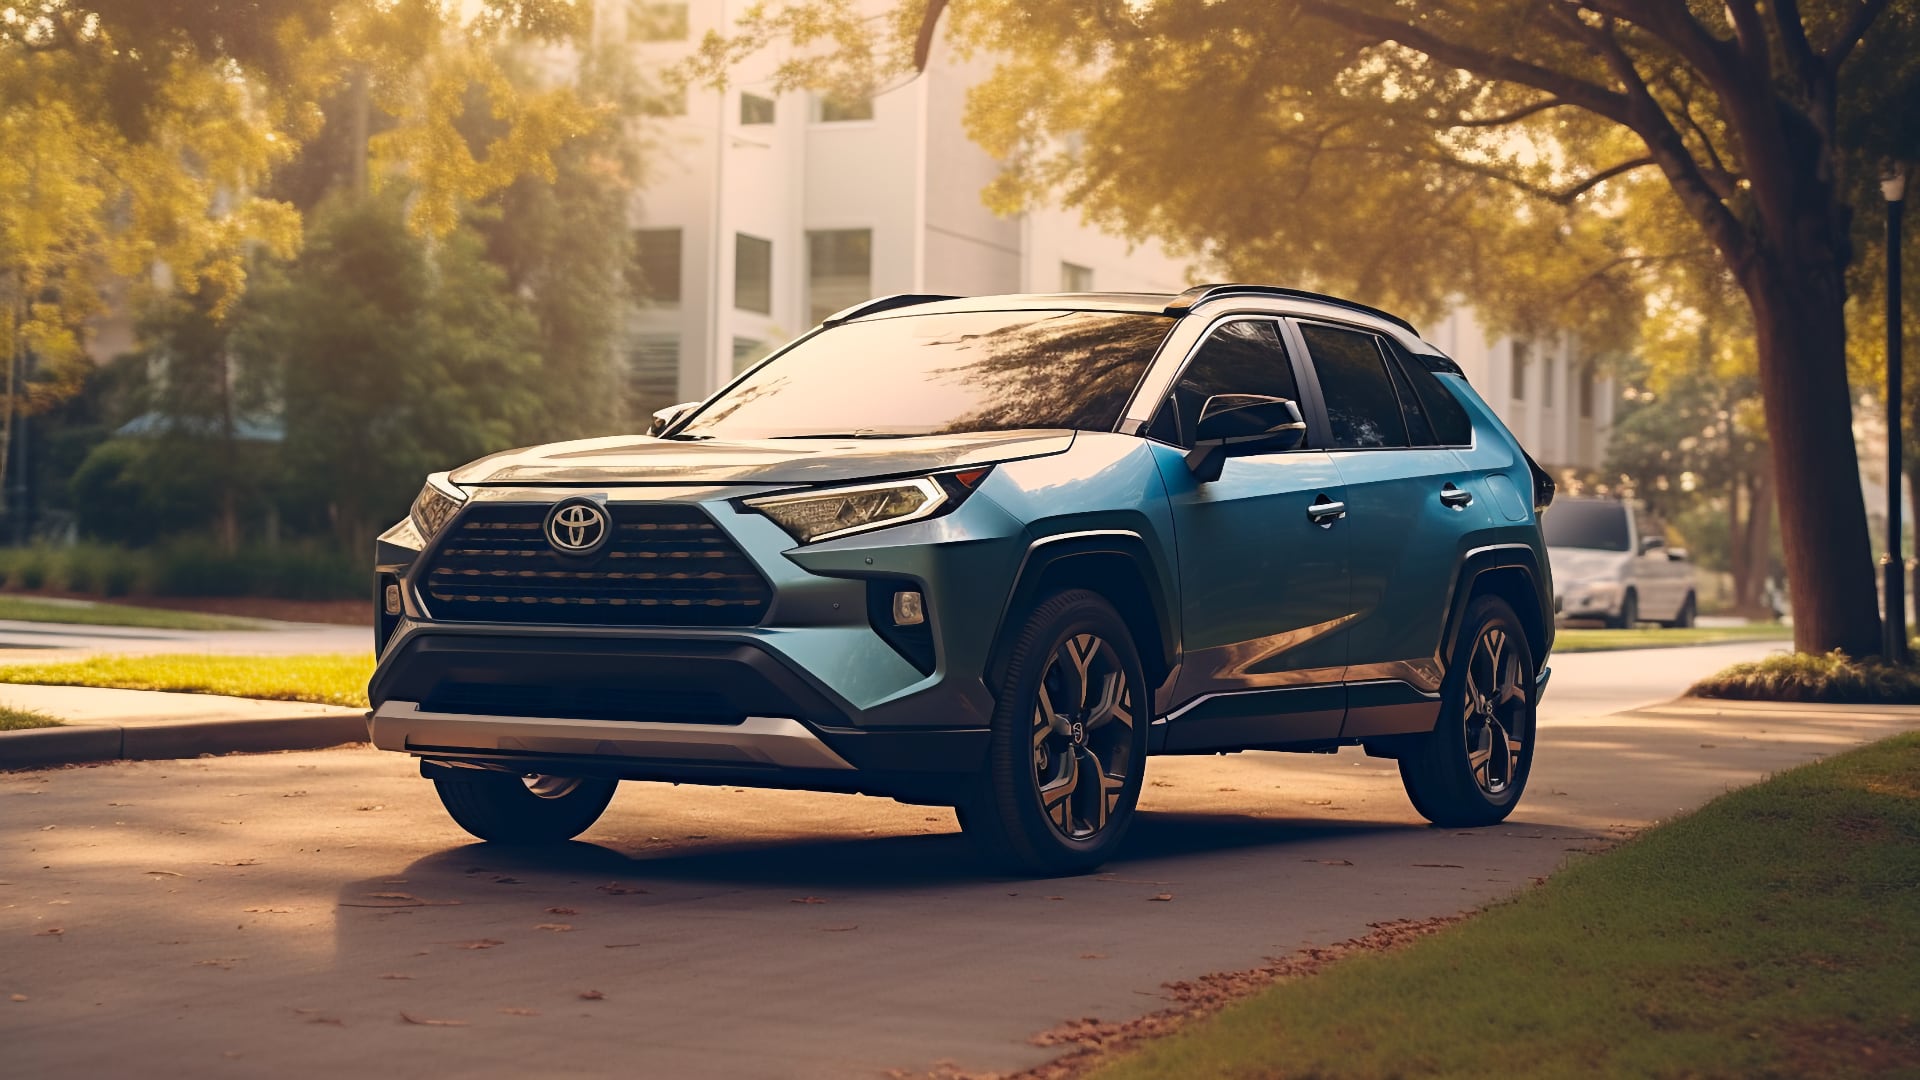 A blue 2020 Toyota RAV4 parked on a street, a reliable choice among Toyota RAV4 years.